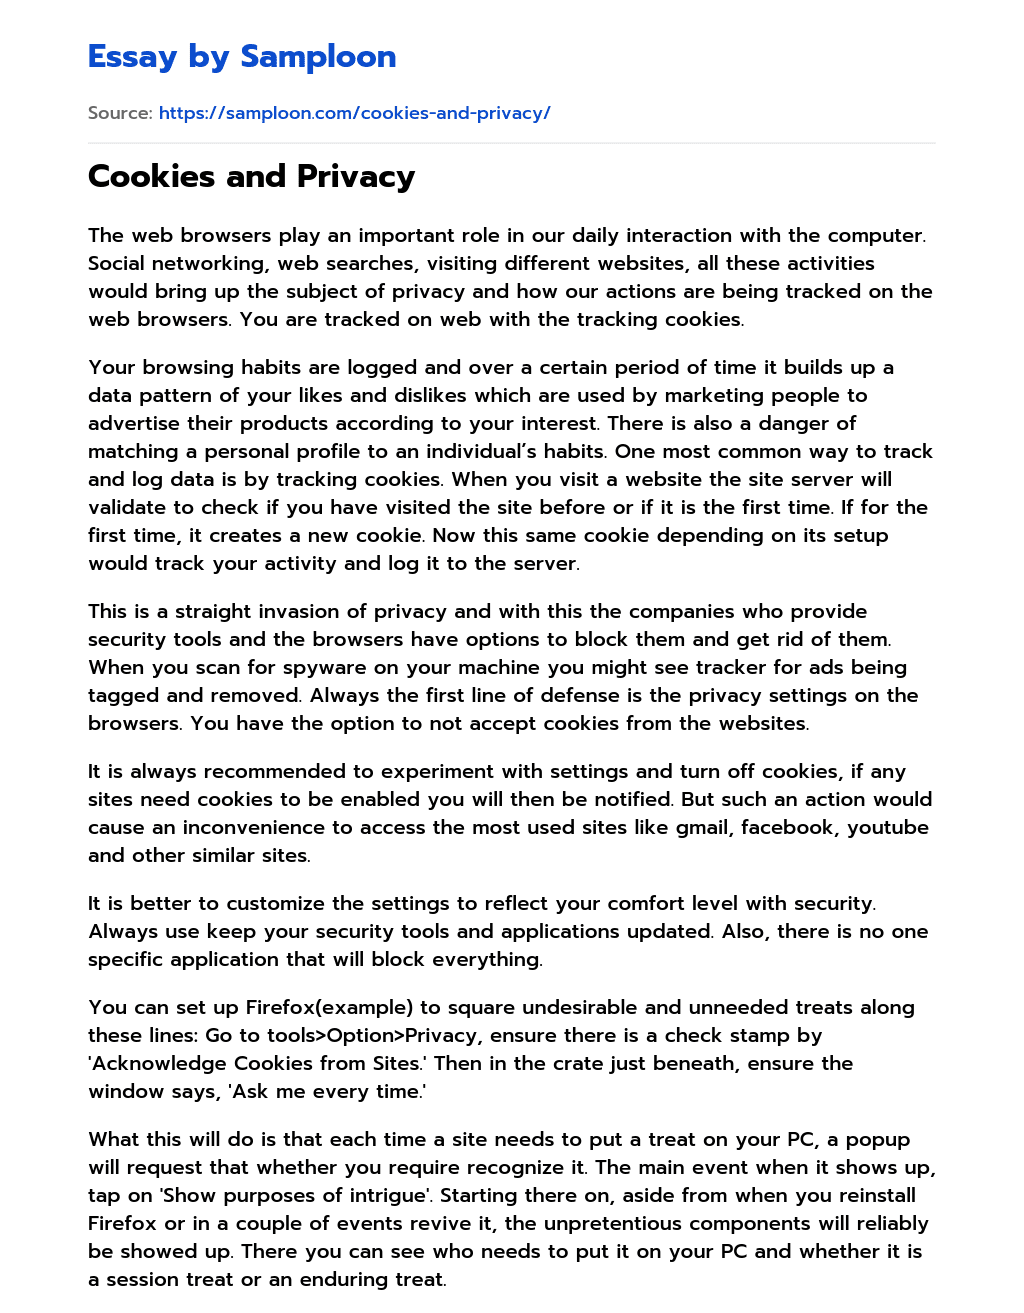 Cookies and Privacy essay